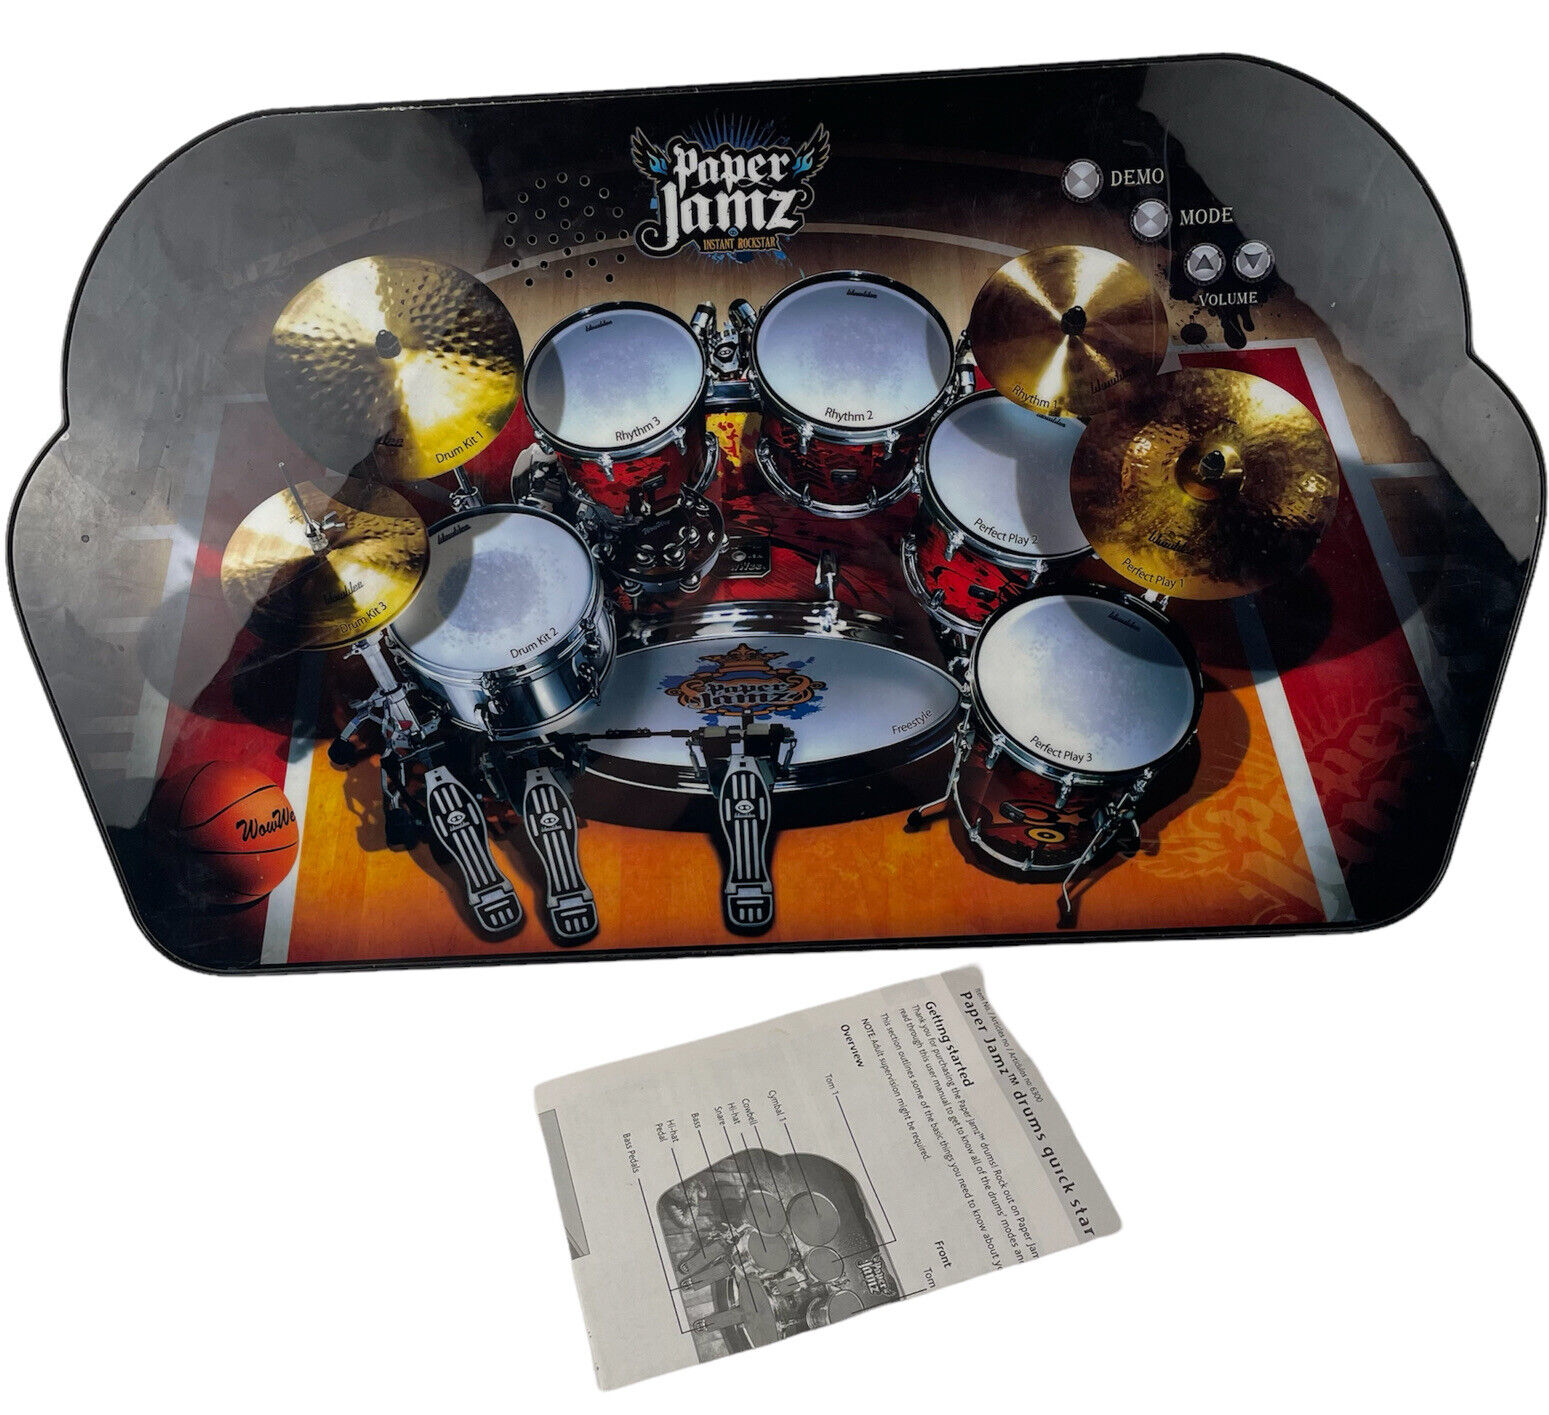 Wowwee Paper Jamz Electronic Drum Kit 2009 Instant Rock Star With Instructions